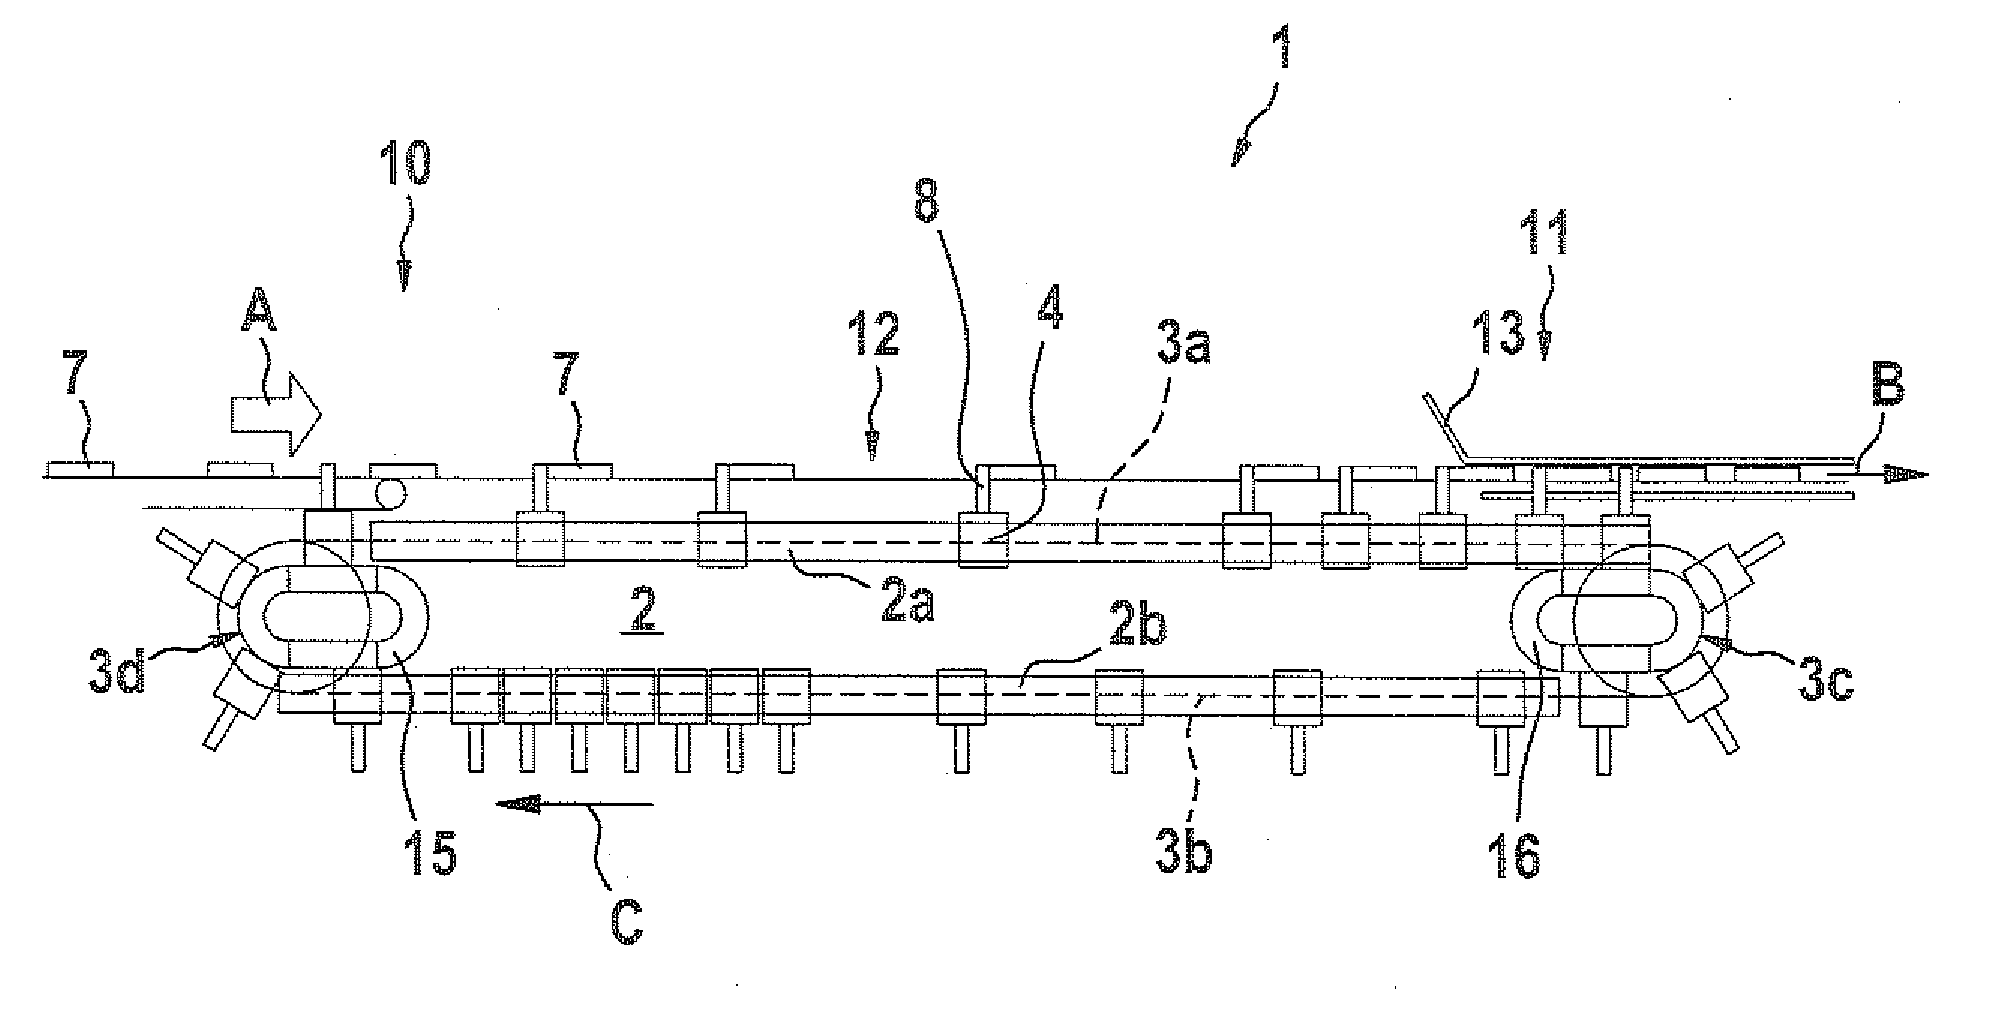 Apparatus  and  method  for  transporting  products,  having a  linear drive  mechanism